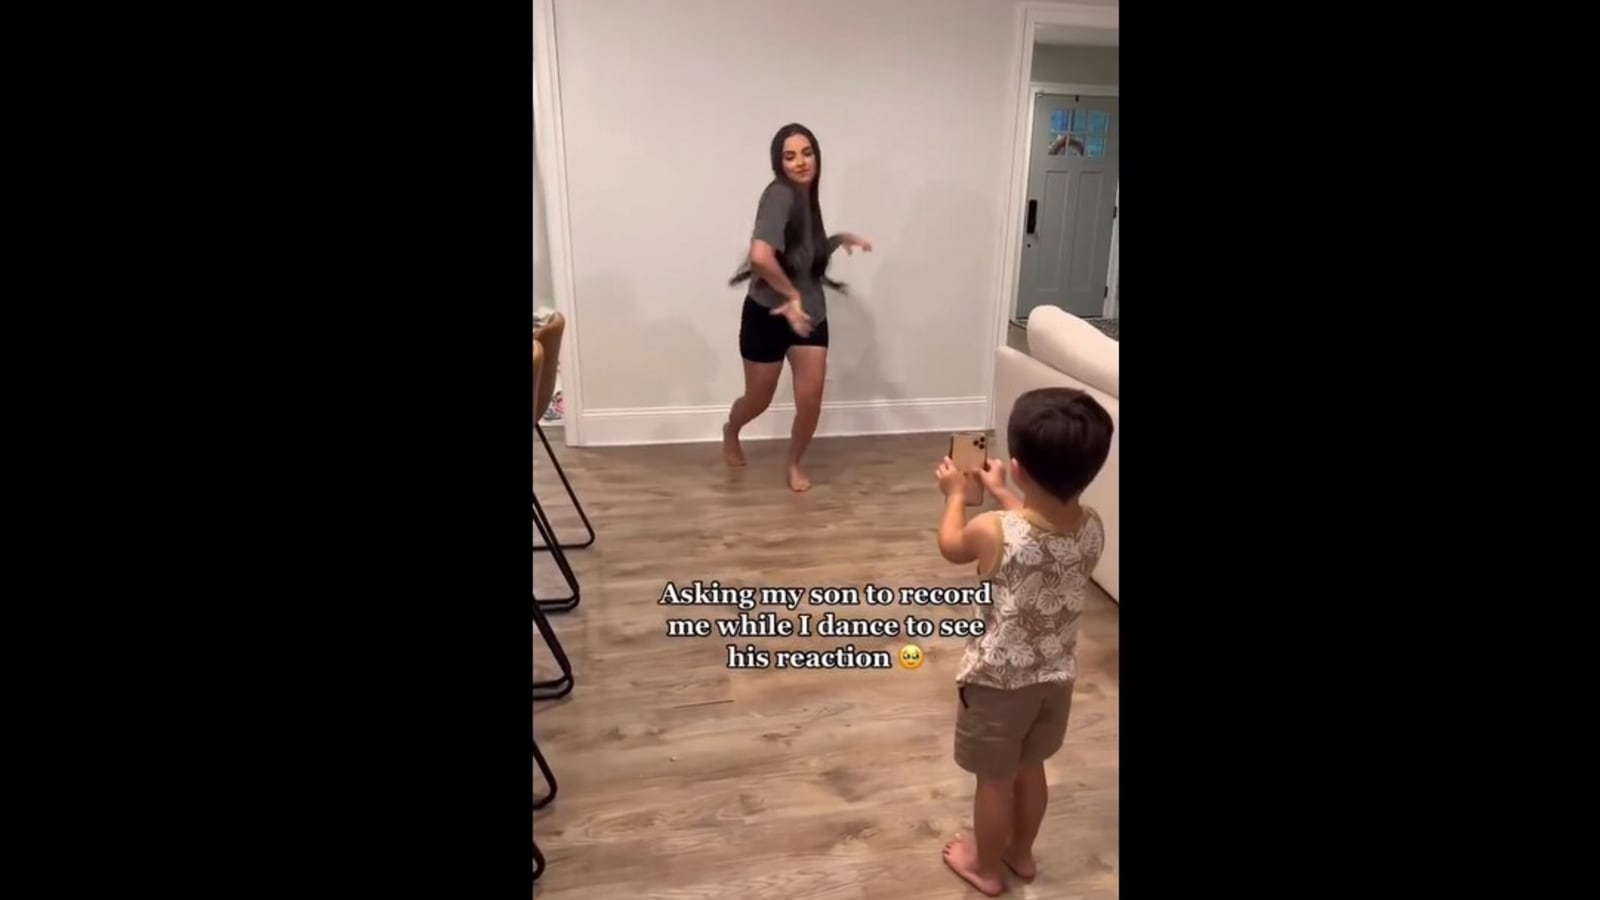 Kid thinks hes recording moms dance, she tricks him in capturing his reaction Trending photo